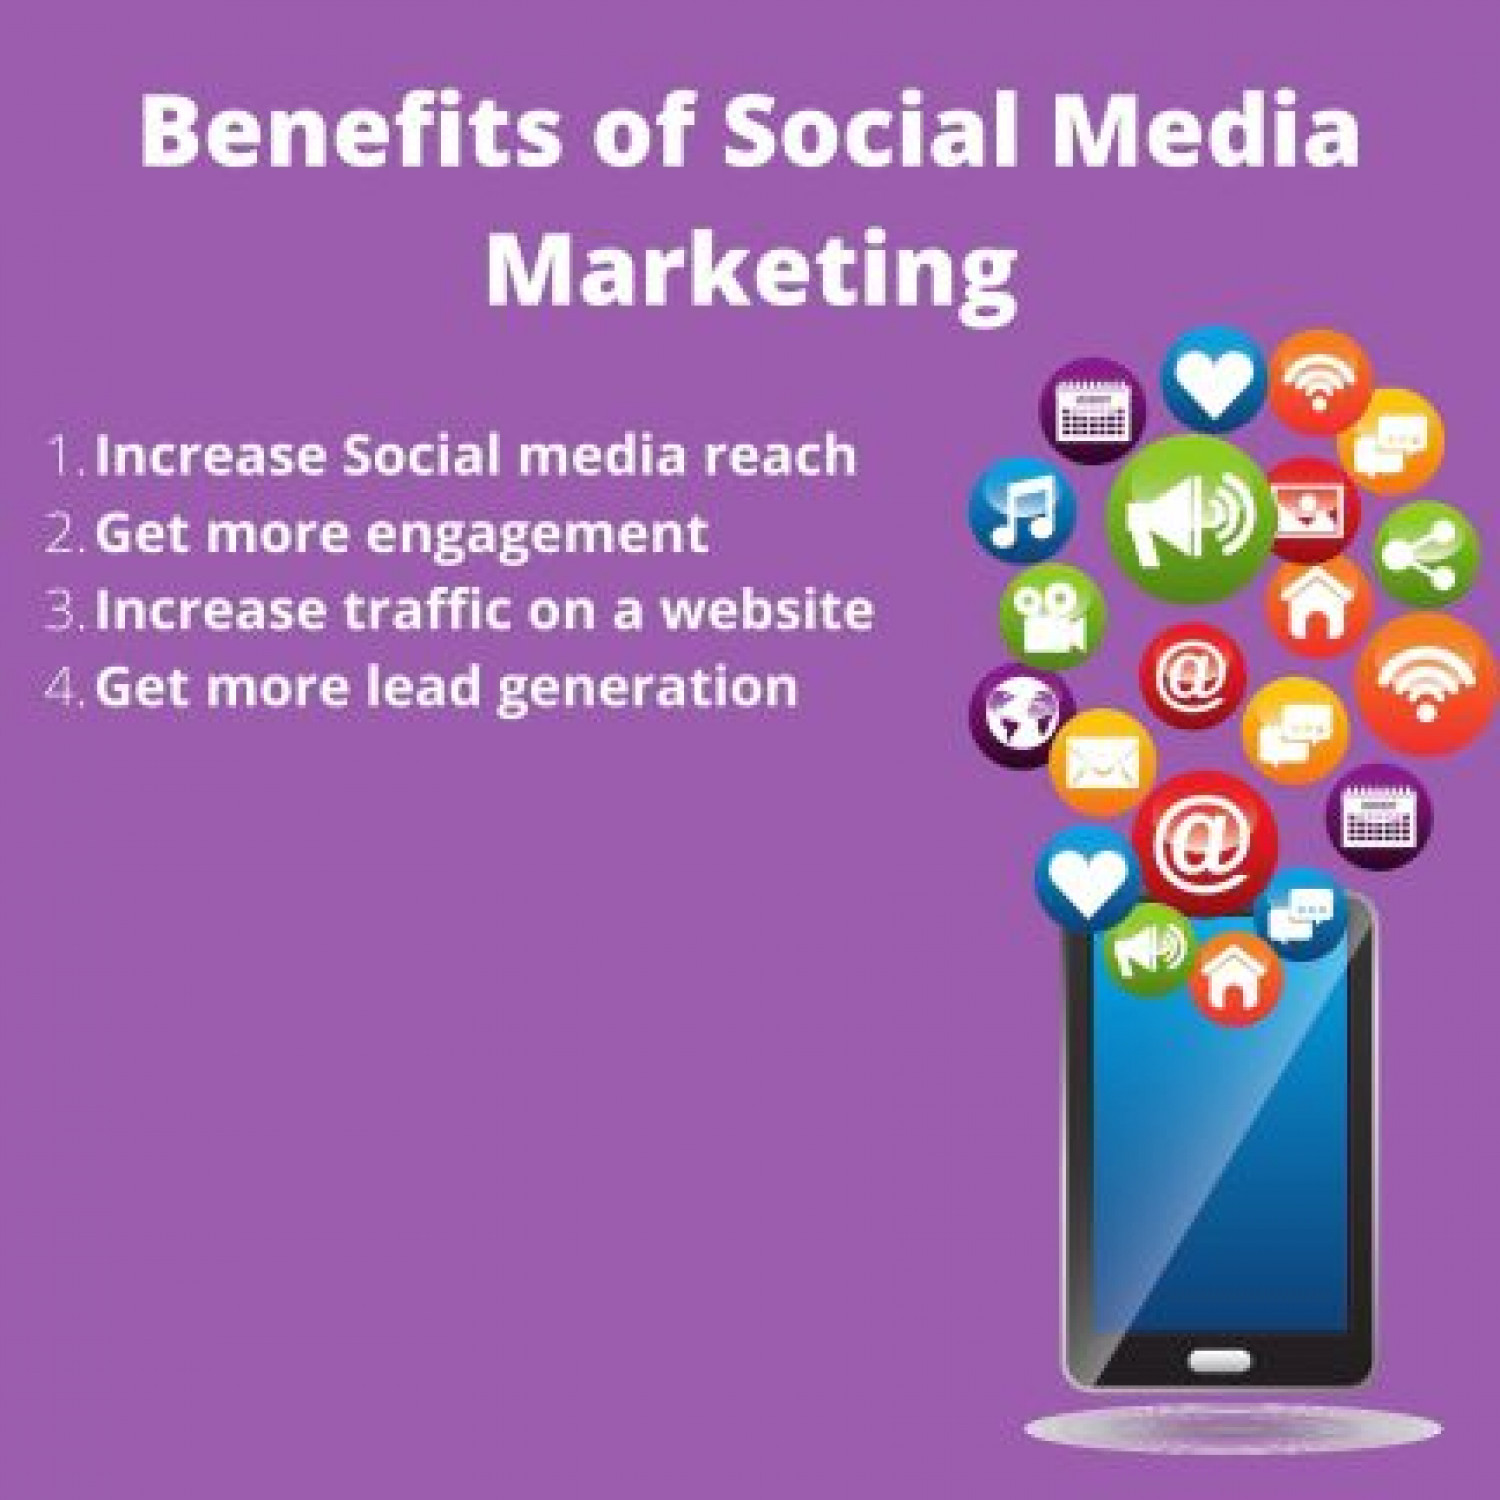 4 Steps of Social Media Marketing Effective For Small Businesses Infographic